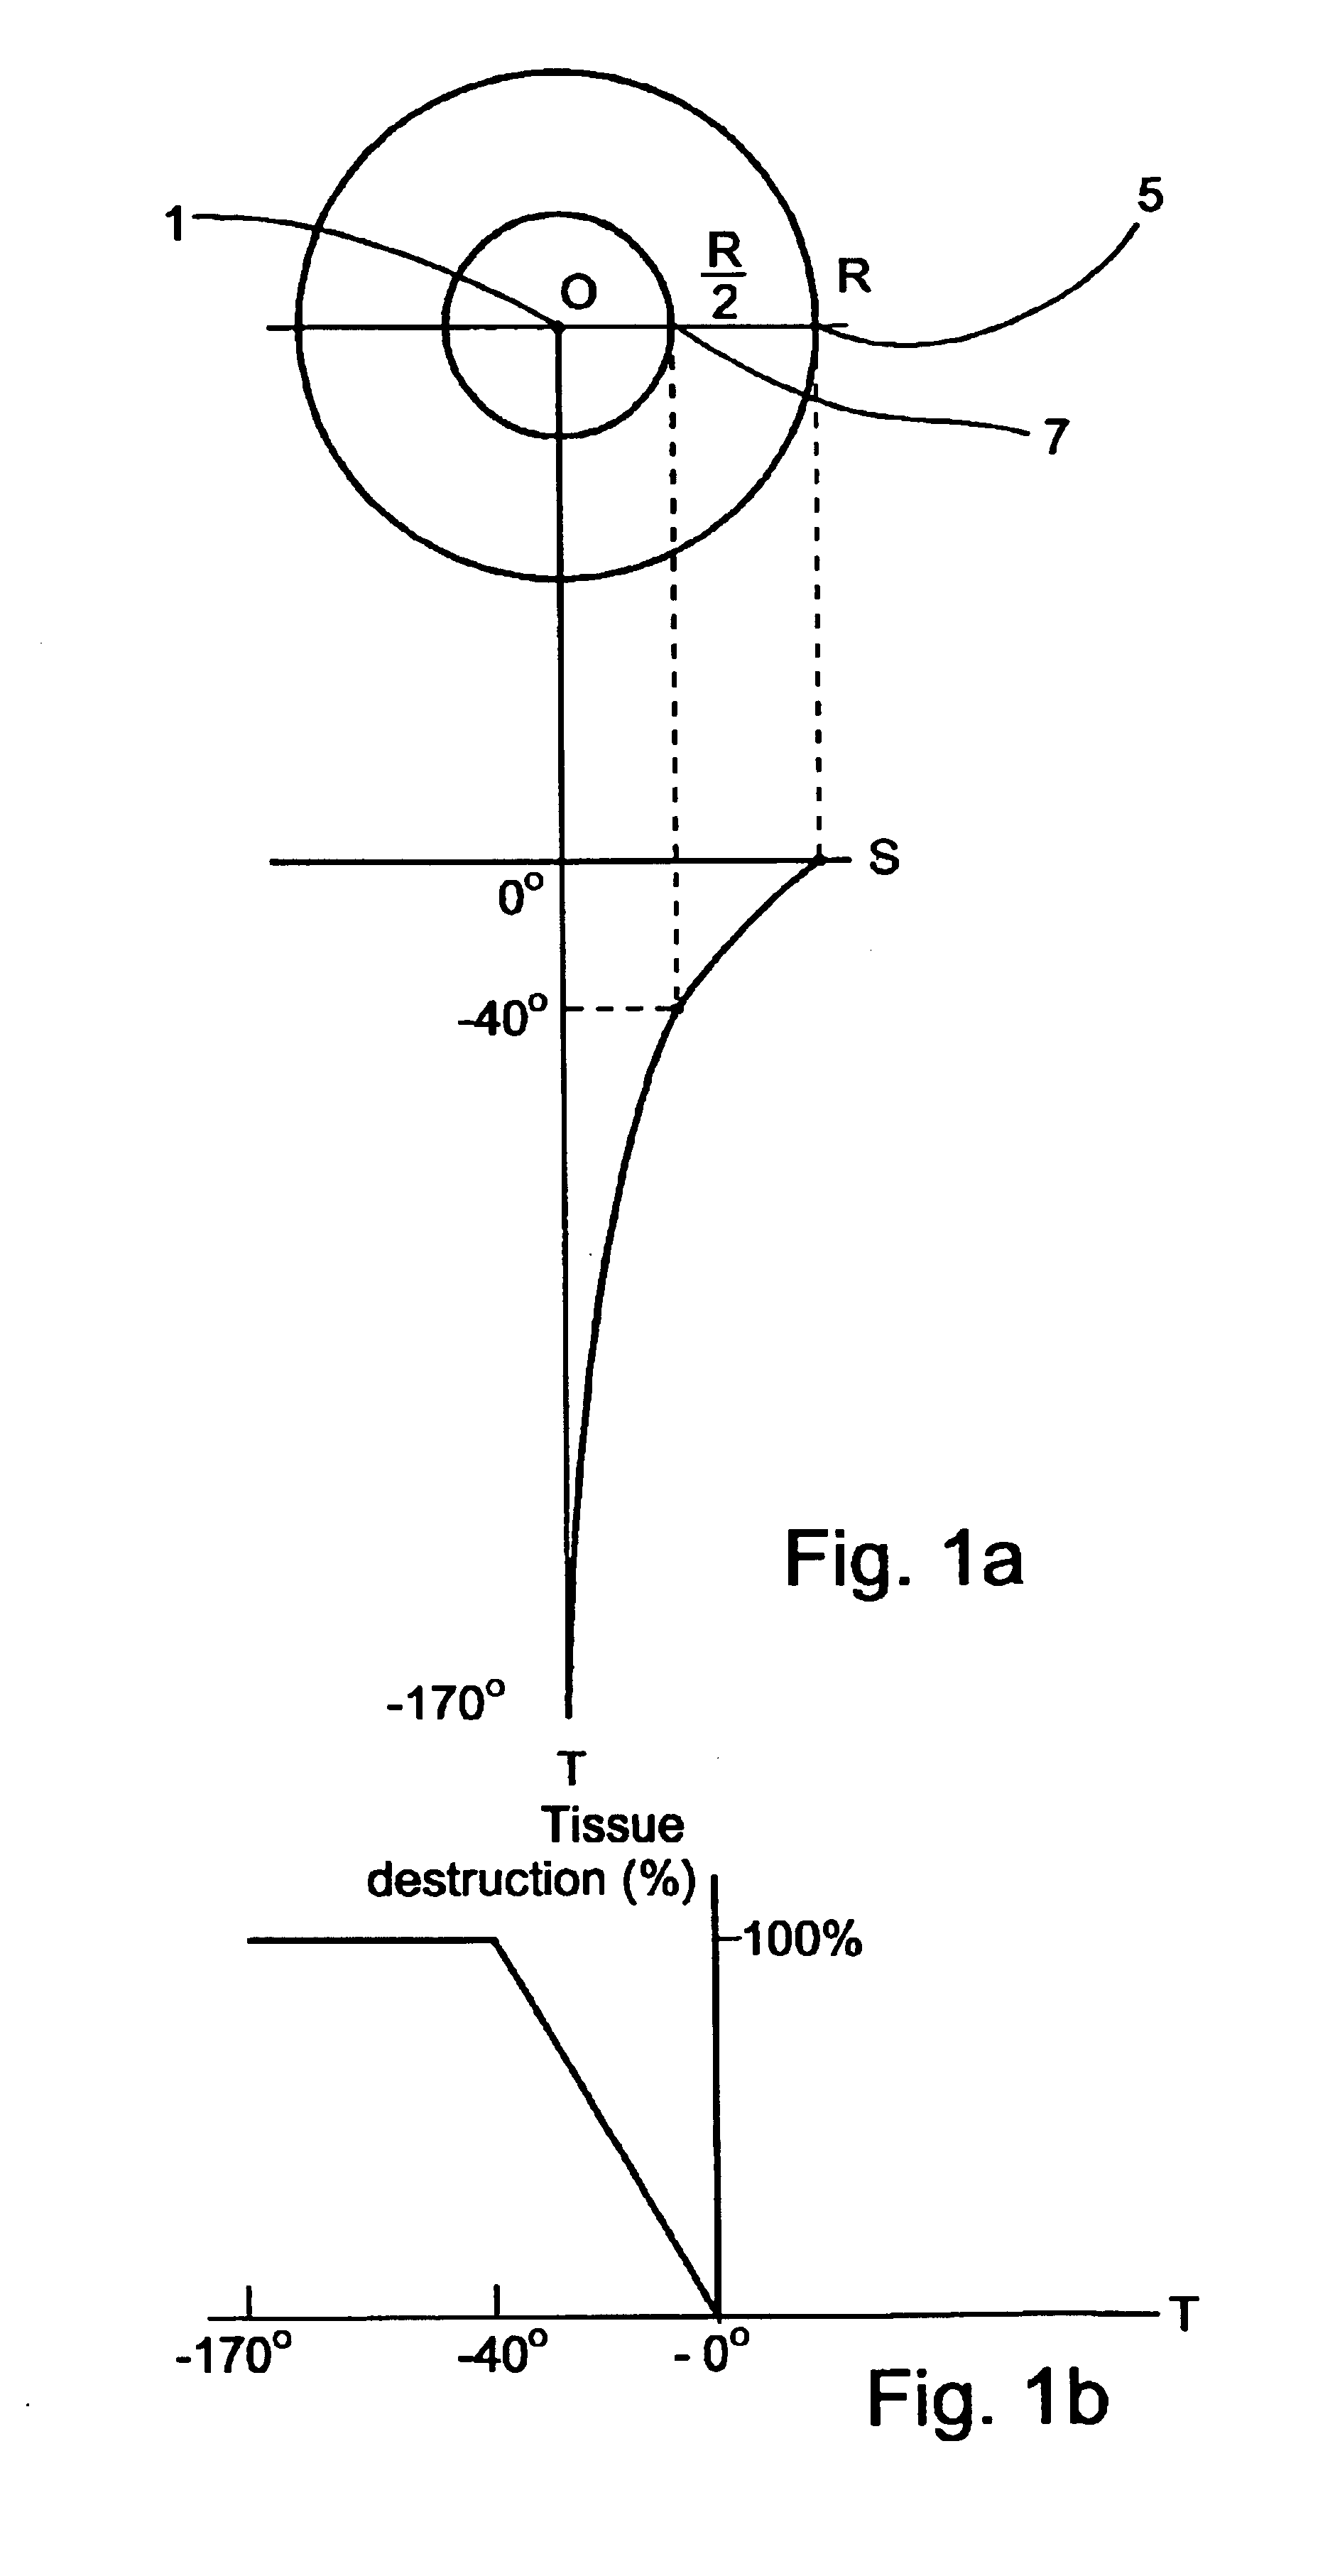 Planning and facilitation systems and methods for cryosurgery